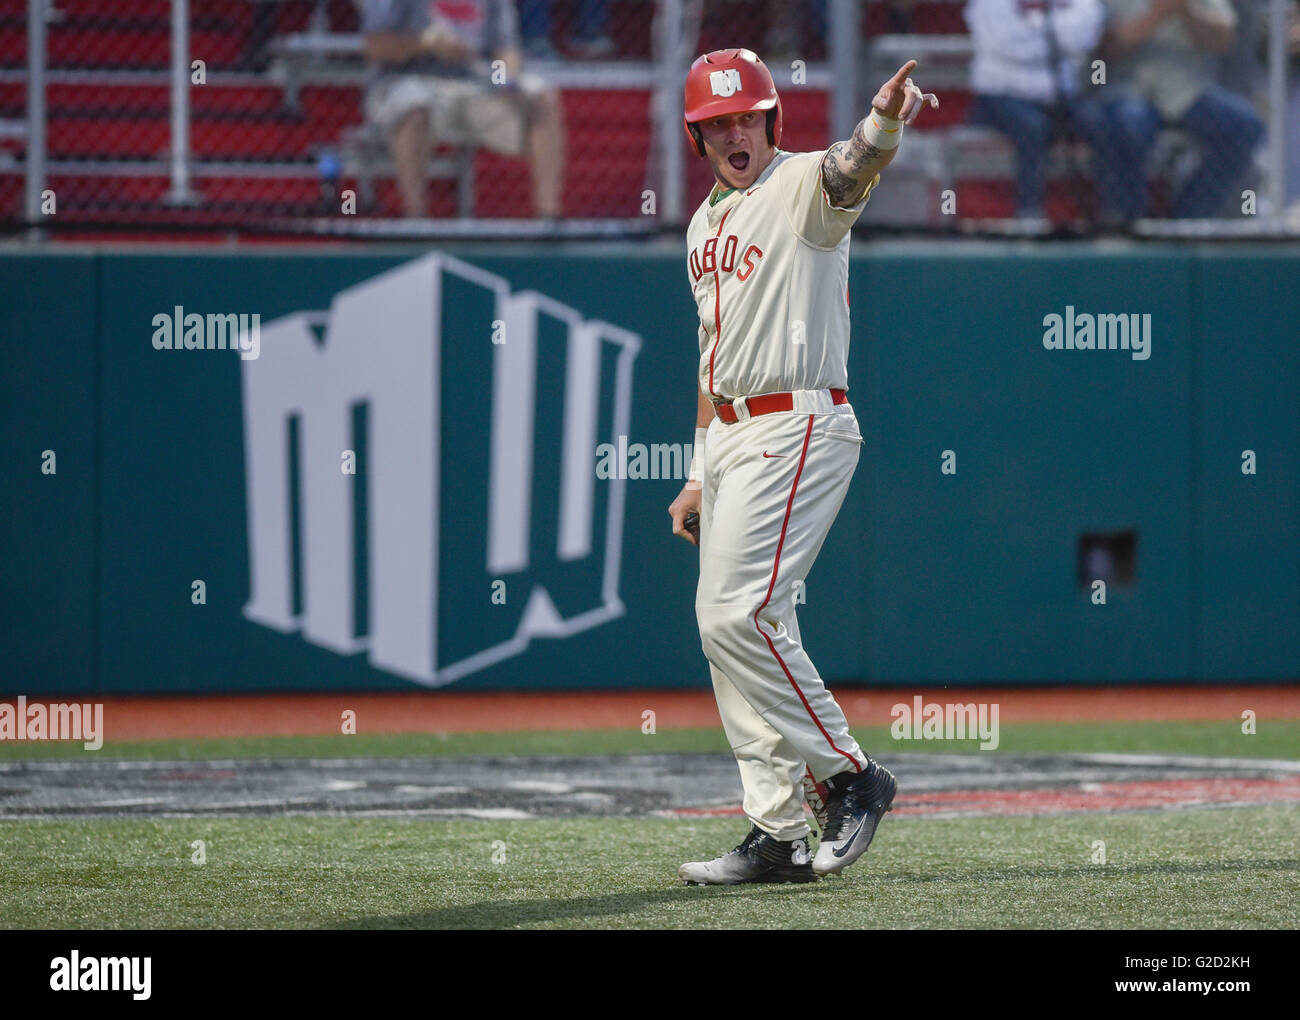 Albuquerque, New Mexico, USA. 27th May, 2016. Journal.Lobo Chris DeVito(cq) gets pumped up after scoring against Air Force Friday evening during their Mountain West Conference Tournament game. The Lobos defeated the Falcons 6 to 4. Albuquerque, New Mexico © Roberto E. Rosales/Albuquerque Journal/ZUMA Wire/Alamy Live News Stock Photo